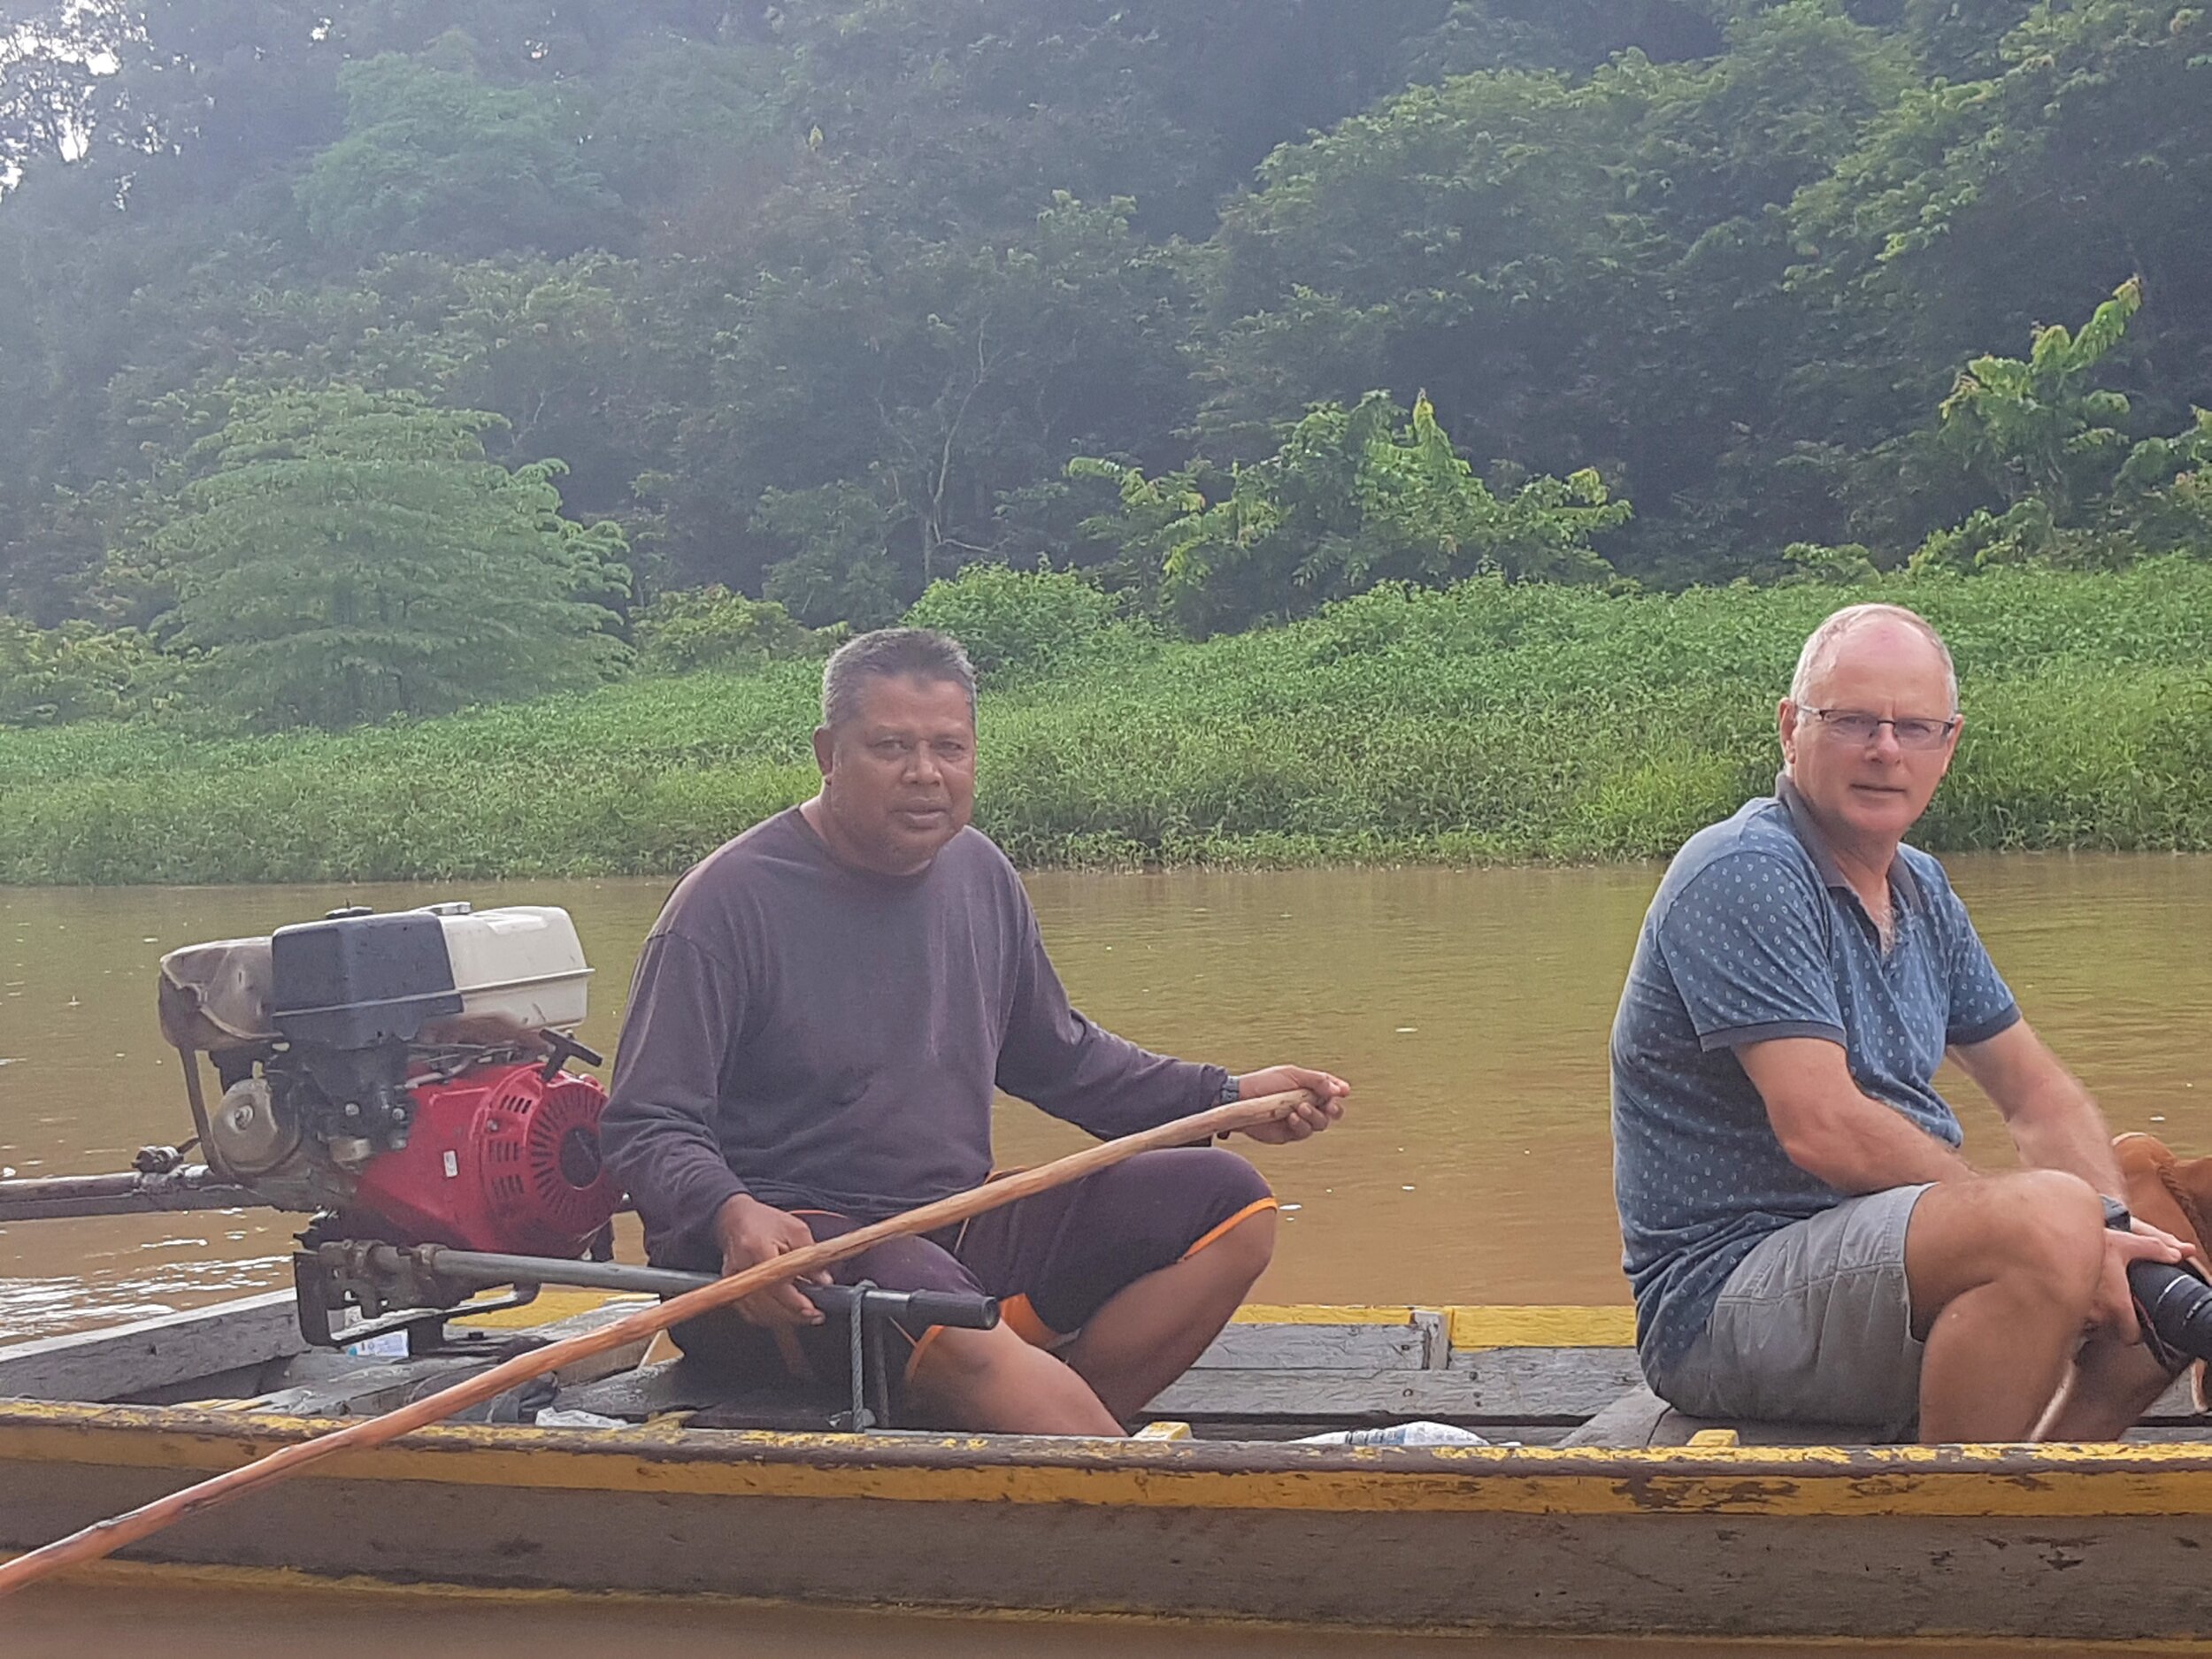 With Sul the boatman drifting down the Muda river